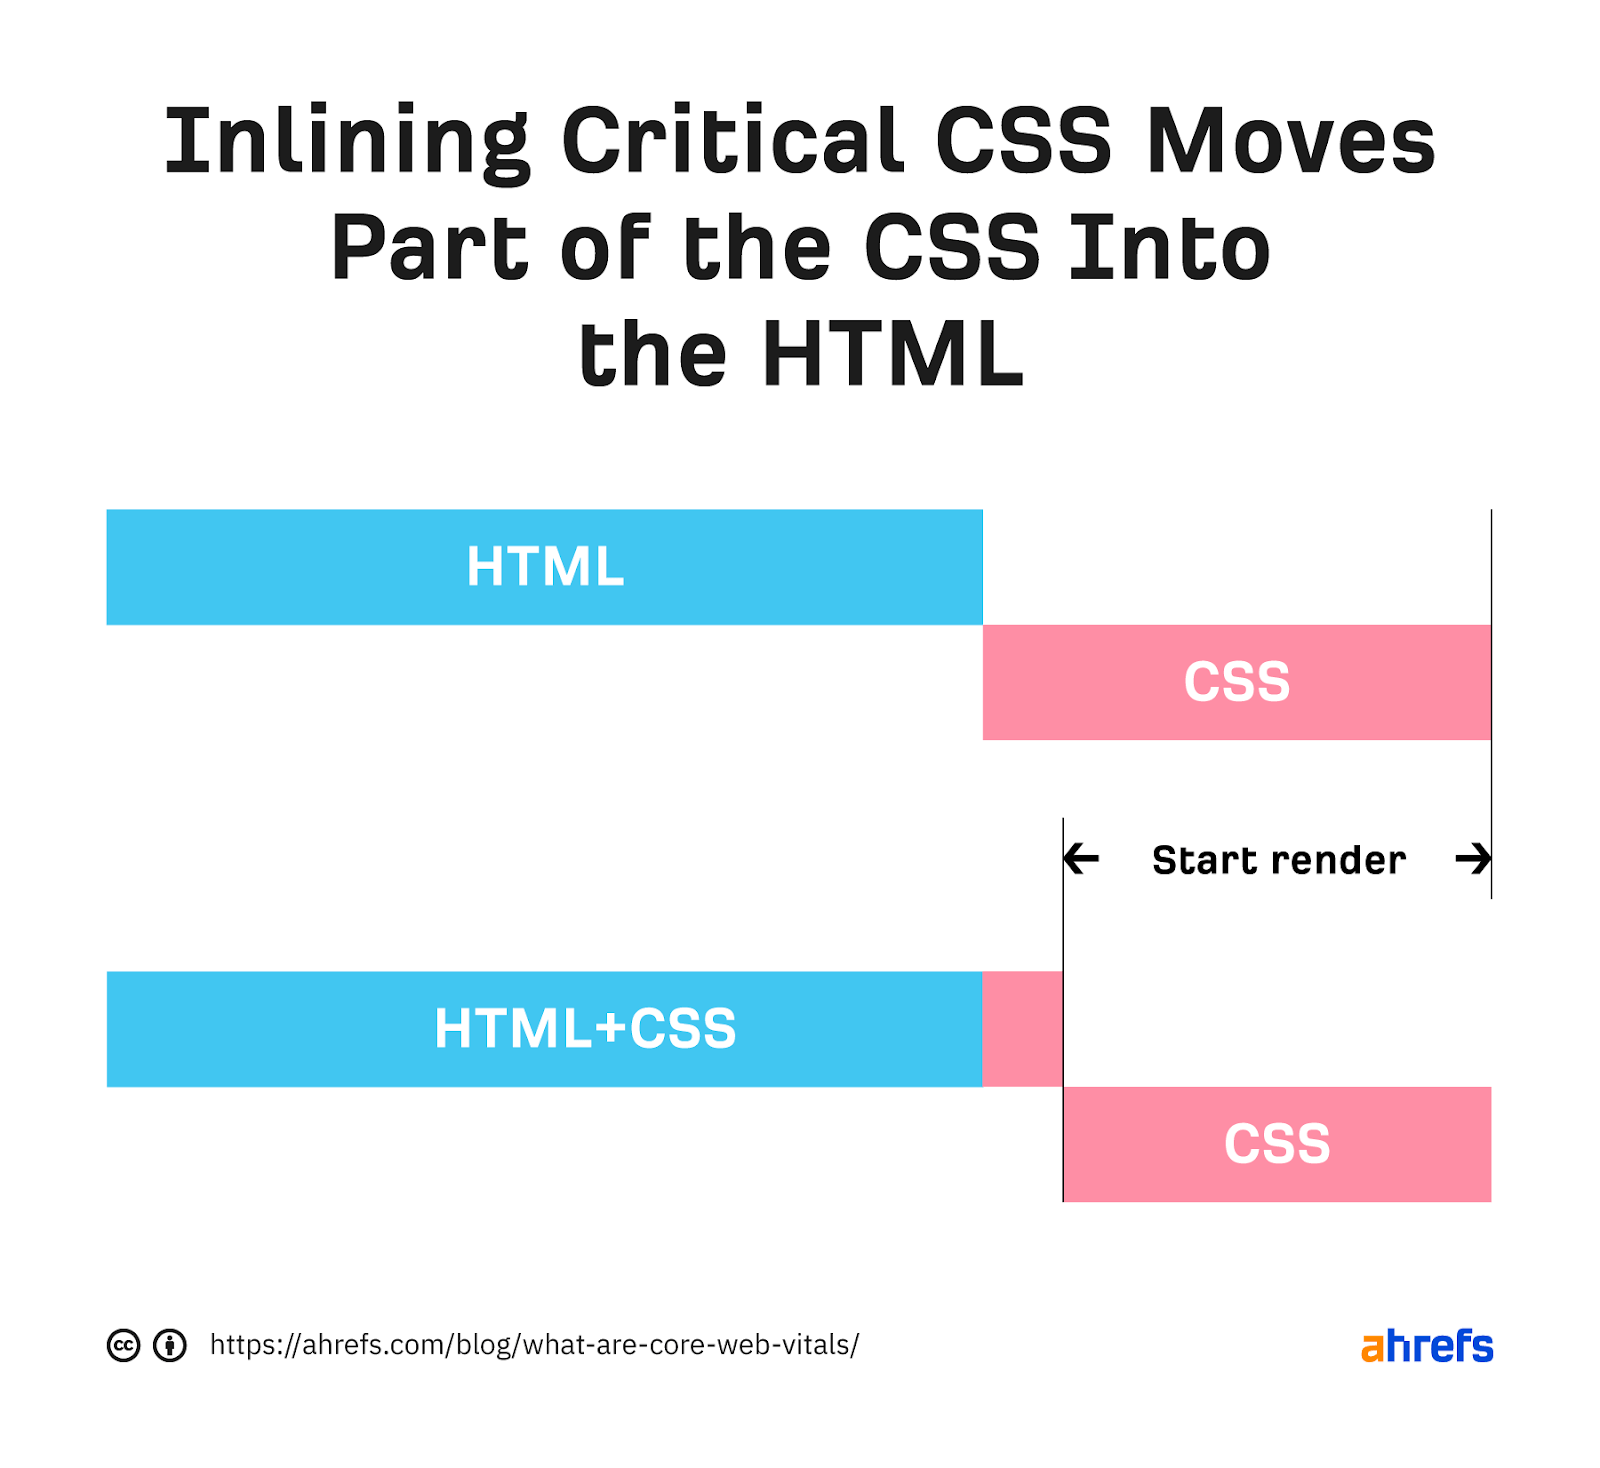 Inlining critical CSS moves part of the CSS into the HTML